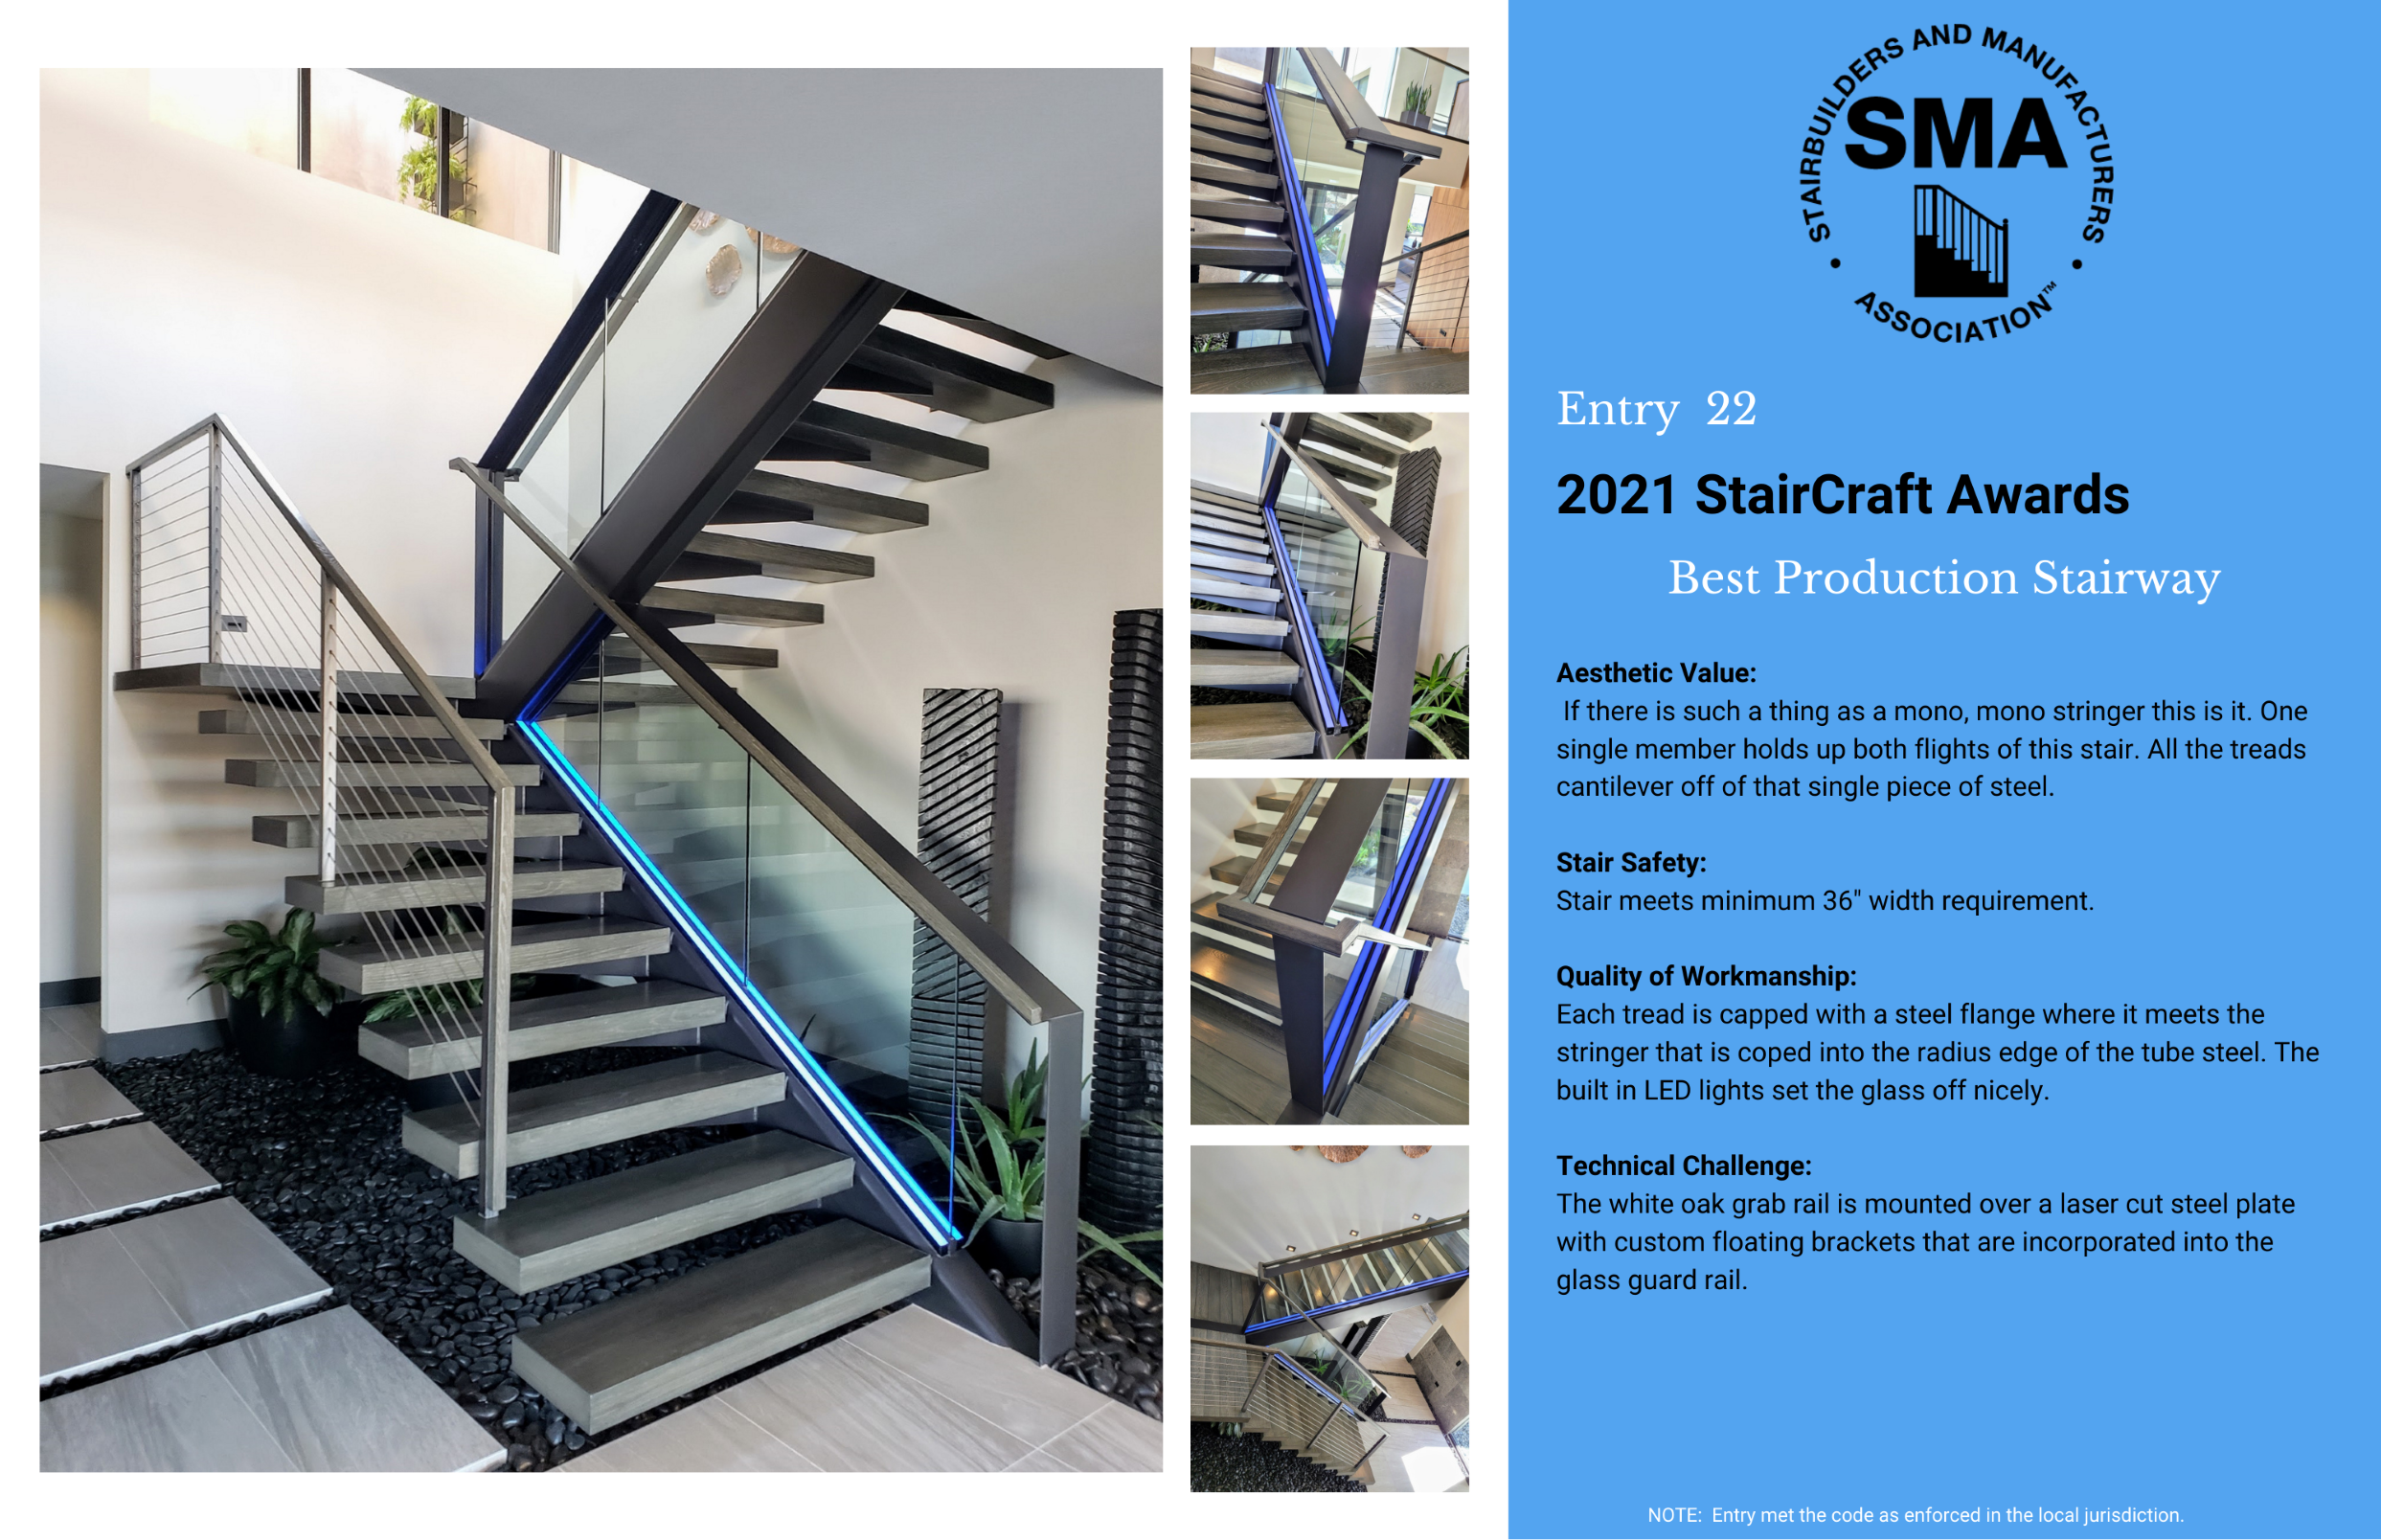 2021 StairCraft Awards Entry 22